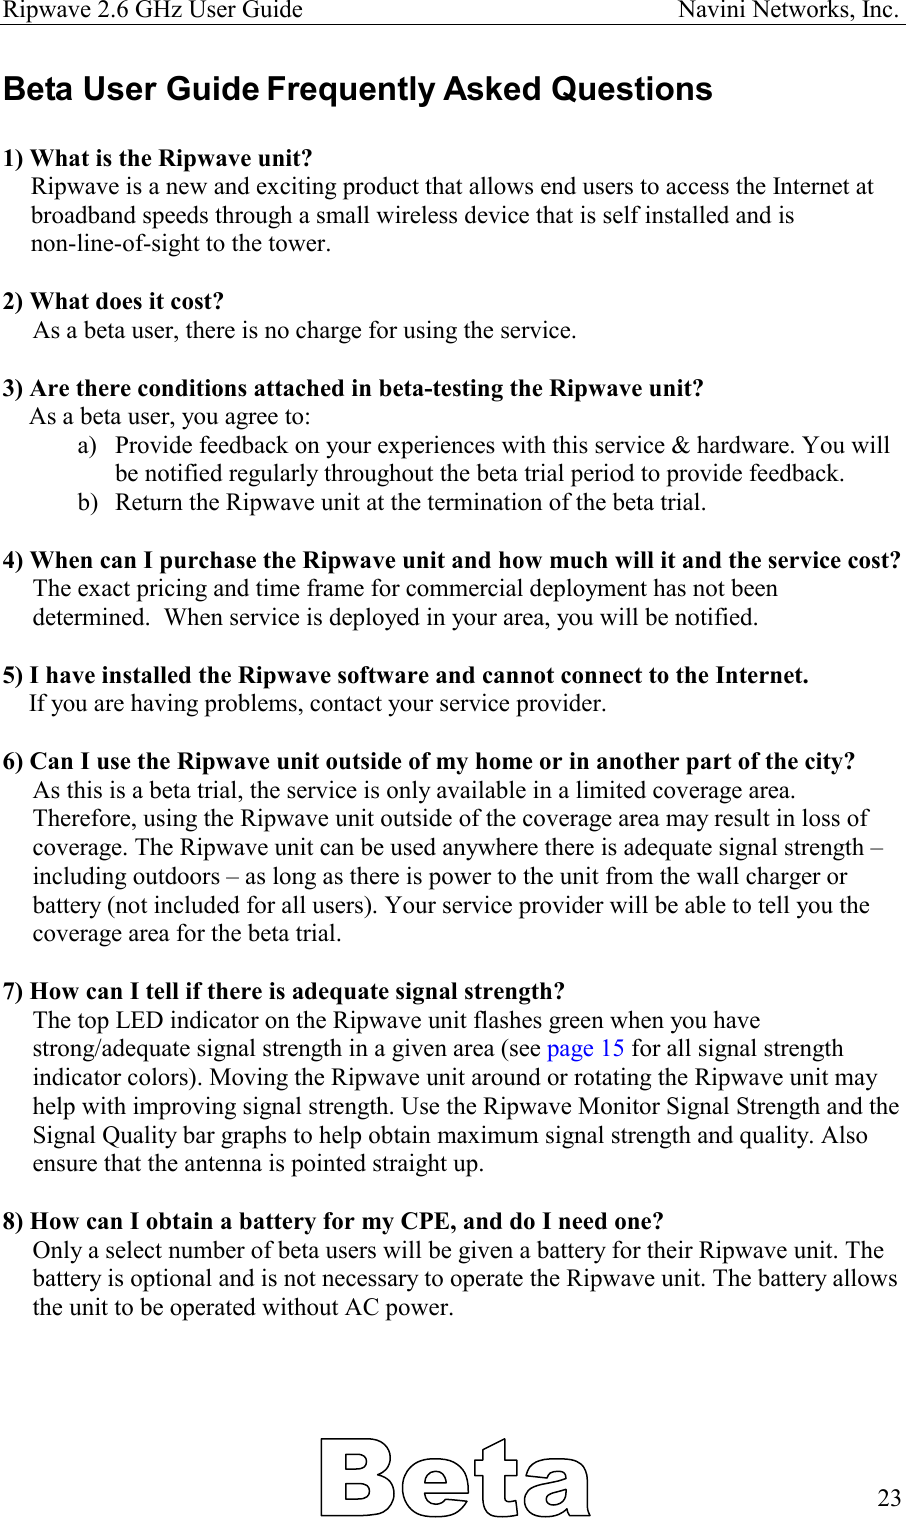 Ripwave 2.6 GHz User Guide                                                            Navini Networks, Inc. Beta User Guide Frequently Asked Questions  1) What is the Ripwave unit?  Ripwave is a new and exciting product that allows end users to access the Internet at broadband speeds through a small wireless device that is self installed and is  non-line-of-sight to the tower.  2) What does it cost? As a beta user, there is no charge for using the service.    3) Are there conditions attached in beta-testing the Ripwave unit? As a beta user, you agree to:  a)  Provide feedback on your experiences with this service &amp; hardware. You will be notified regularly throughout the beta trial period to provide feedback. b)  Return the Ripwave unit at the termination of the beta trial.  4) When can I purchase the Ripwave unit and how much will it and the service cost? The exact pricing and time frame for commercial deployment has not been determined.  When service is deployed in your area, you will be notified.  5) I have installed the Ripwave software and cannot connect to the Internet. If you are having problems, contact your service provider.  6) Can I use the Ripwave unit outside of my home or in another part of the city? As this is a beta trial, the service is only available in a limited coverage area. Therefore, using the Ripwave unit outside of the coverage area may result in loss of coverage. The Ripwave unit can be used anywhere there is adequate signal strength – including outdoors – as long as there is power to the unit from the wall charger or battery (not included for all users). Your service provider will be able to tell you the coverage area for the beta trial.  7) How can I tell if there is adequate signal strength? The top LED indicator on the Ripwave unit flashes green when you have strong/adequate signal strength in a given area (see page 15 for all signal strength indicator colors). Moving the Ripwave unit around or rotating the Ripwave unit may help with improving signal strength. Use the Ripwave Monitor Signal Strength and the Signal Quality bar graphs to help obtain maximum signal strength and quality. Also ensure that the antenna is pointed straight up.  8) How can I obtain a battery for my CPE, and do I need one? Only a select number of beta users will be given a battery for their Ripwave unit. The battery is optional and is not necessary to operate the Ripwave unit. The battery allows the unit to be operated without AC power.        23